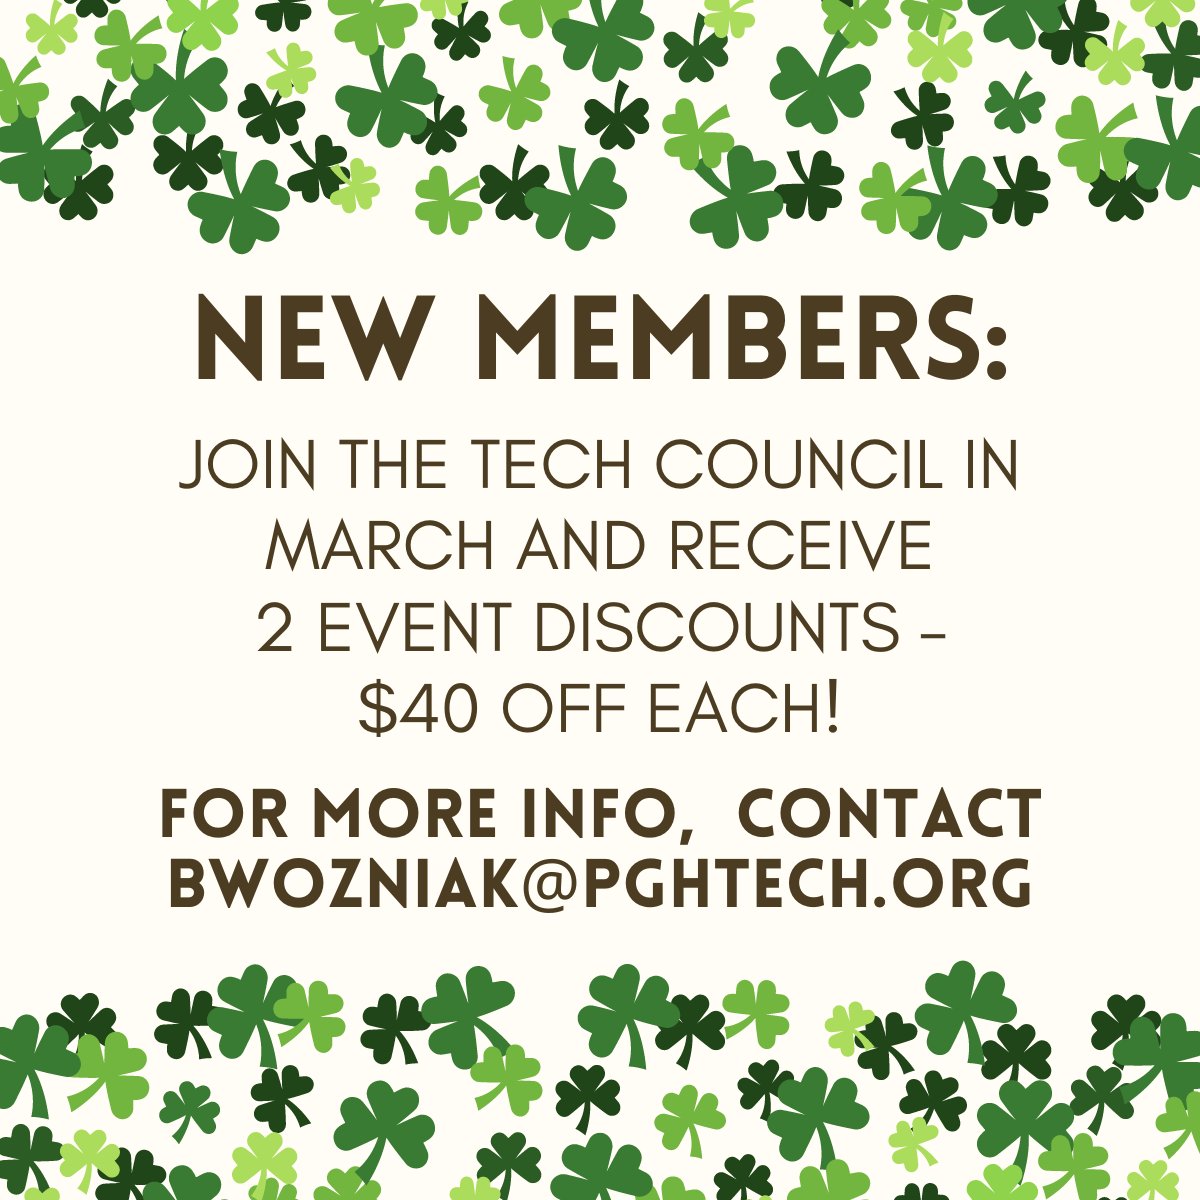 It's March (New Member) Madness! Join the Pittsburgh Technology Council this month and receive 2 event discounts - a value of $40 off each! For more information, contact Brooke Wozniak at bwozniak@pghtech.org.